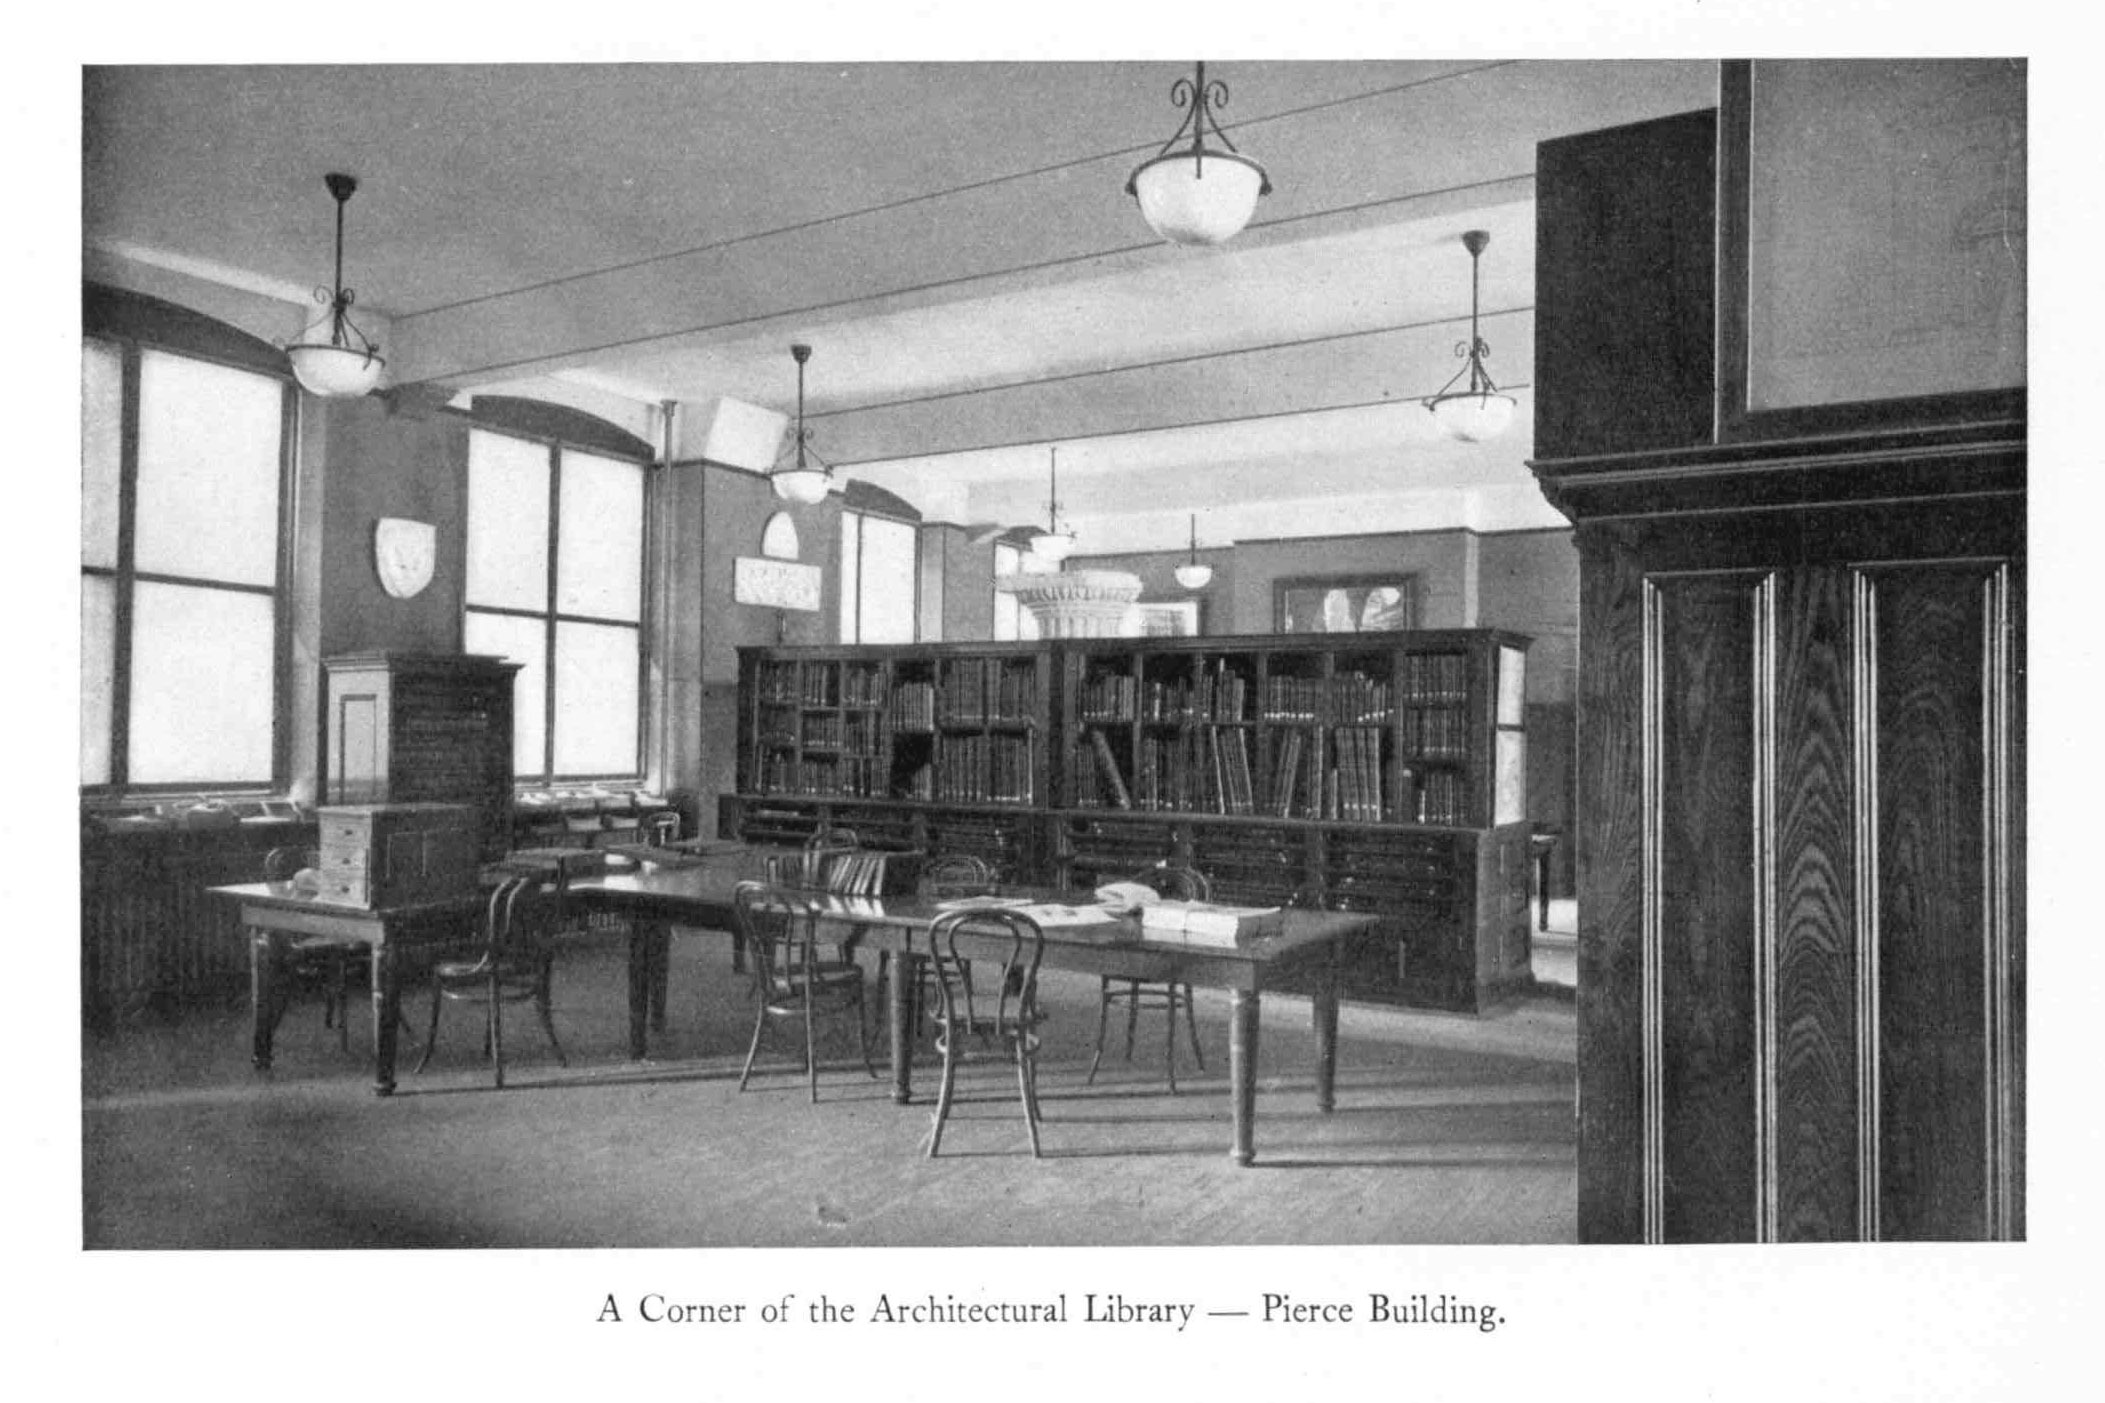 photo of a wood paneled study room with the caption "A corner of the Architectural Library __Pierce building"